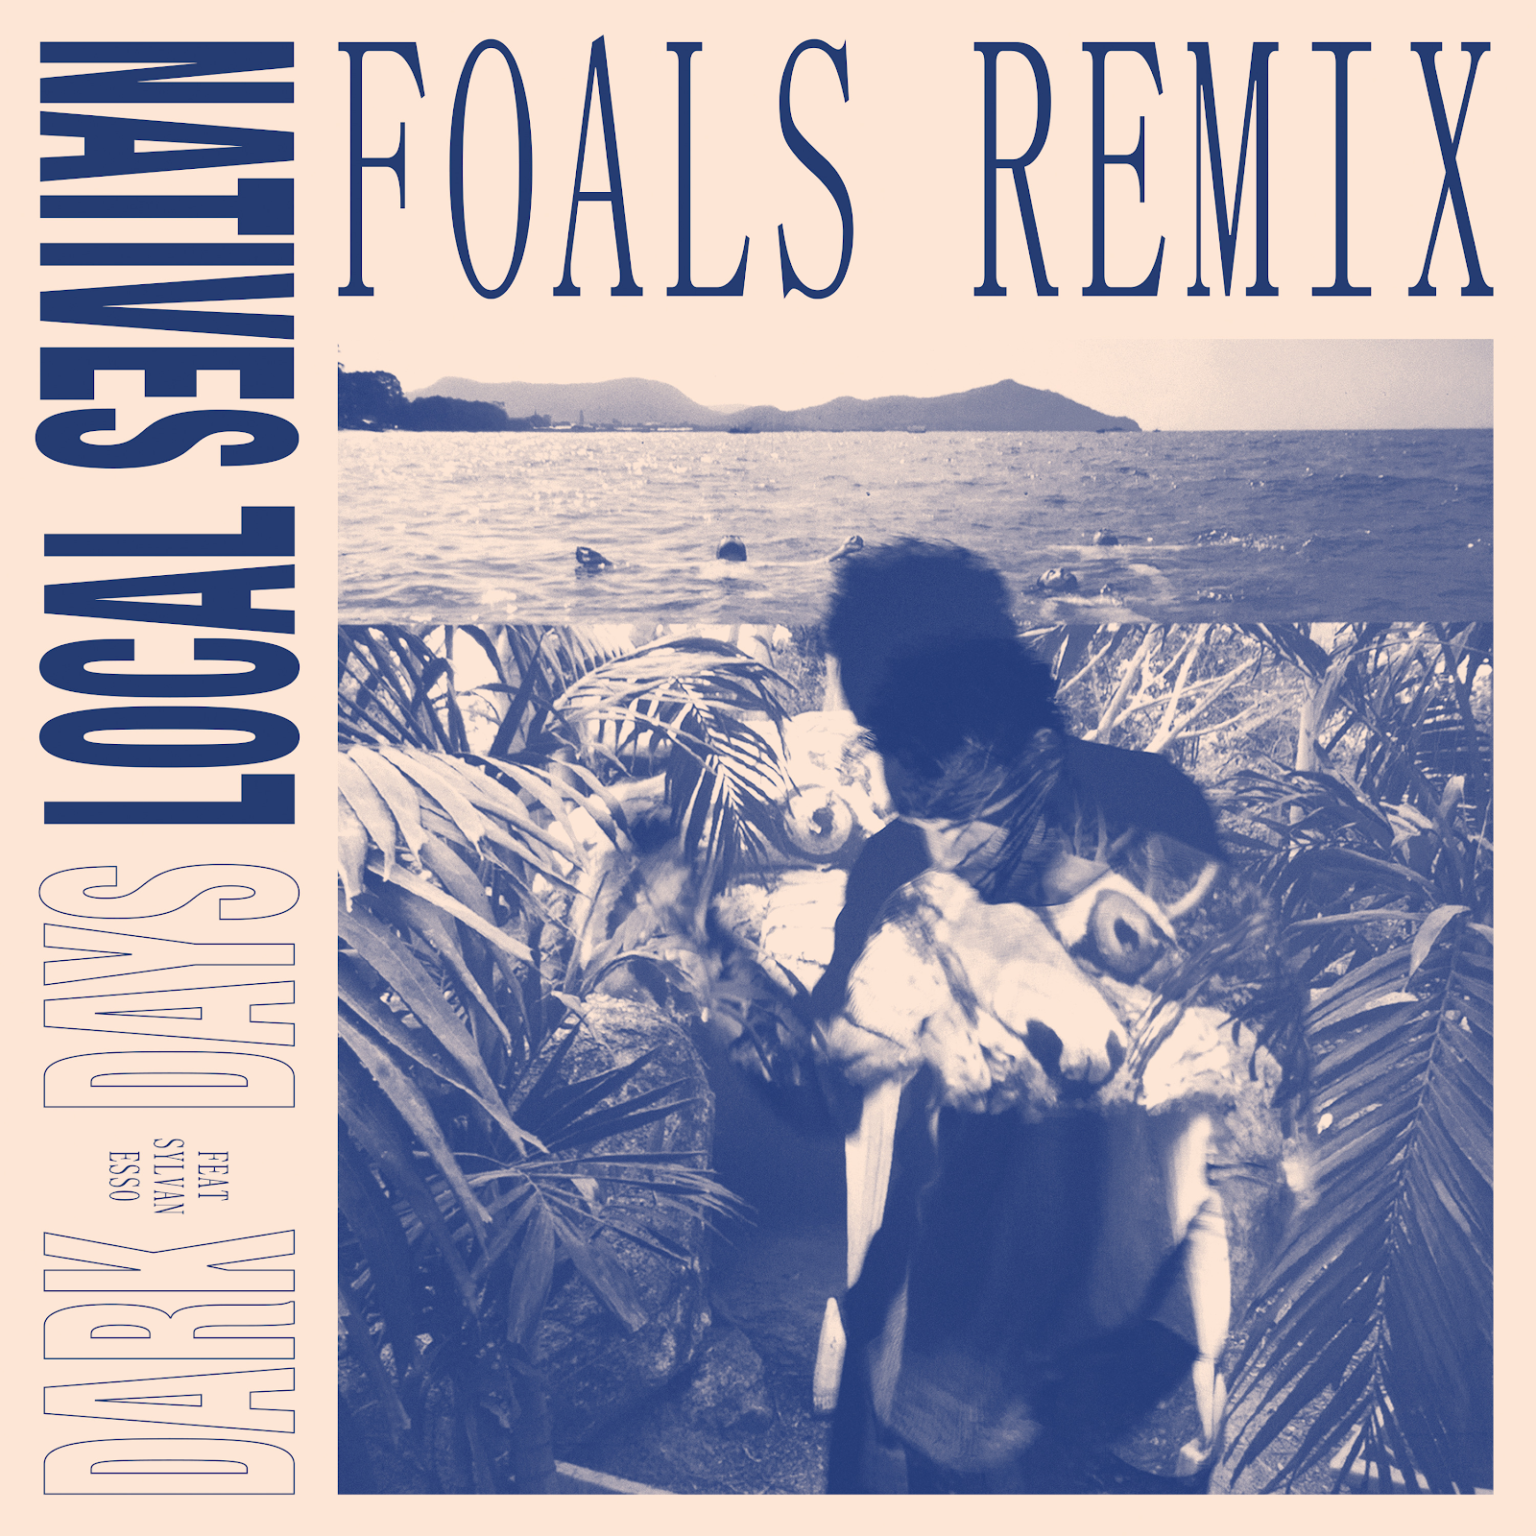 Local Natives "Dark Days" Gets remixed by Foals (ft Sylvan Esso). The track is now available via Loma Vista Recordings and DSPs